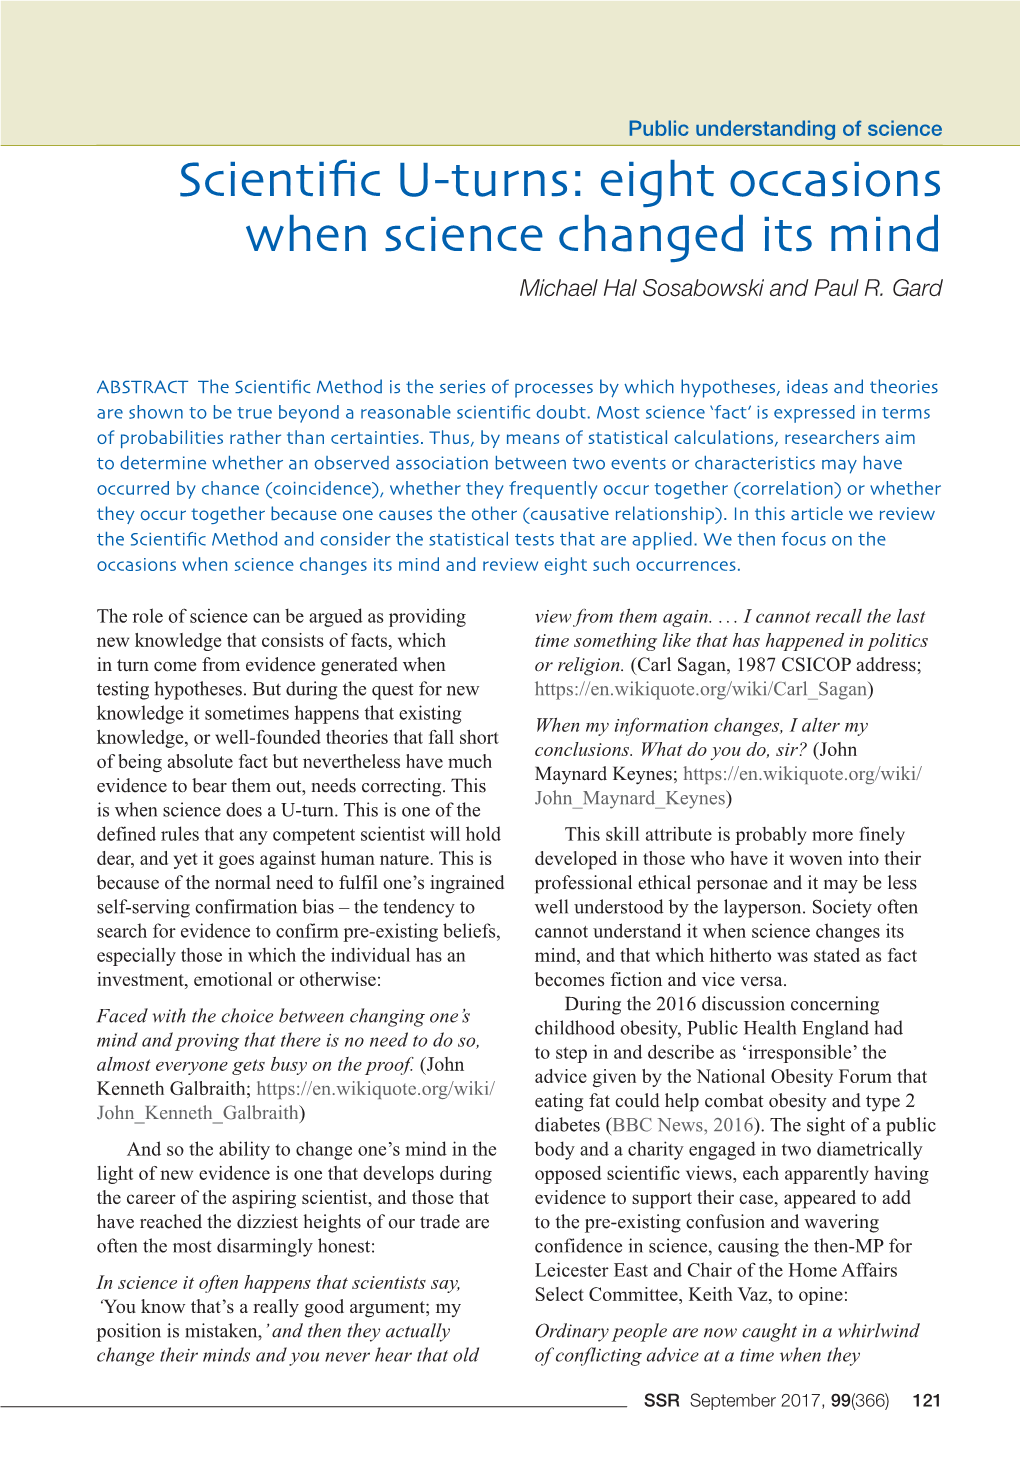 Scientific U-Turns: Eight Occasions When Science Changed Its Mind Michael Hal Sosabowski and Paul R